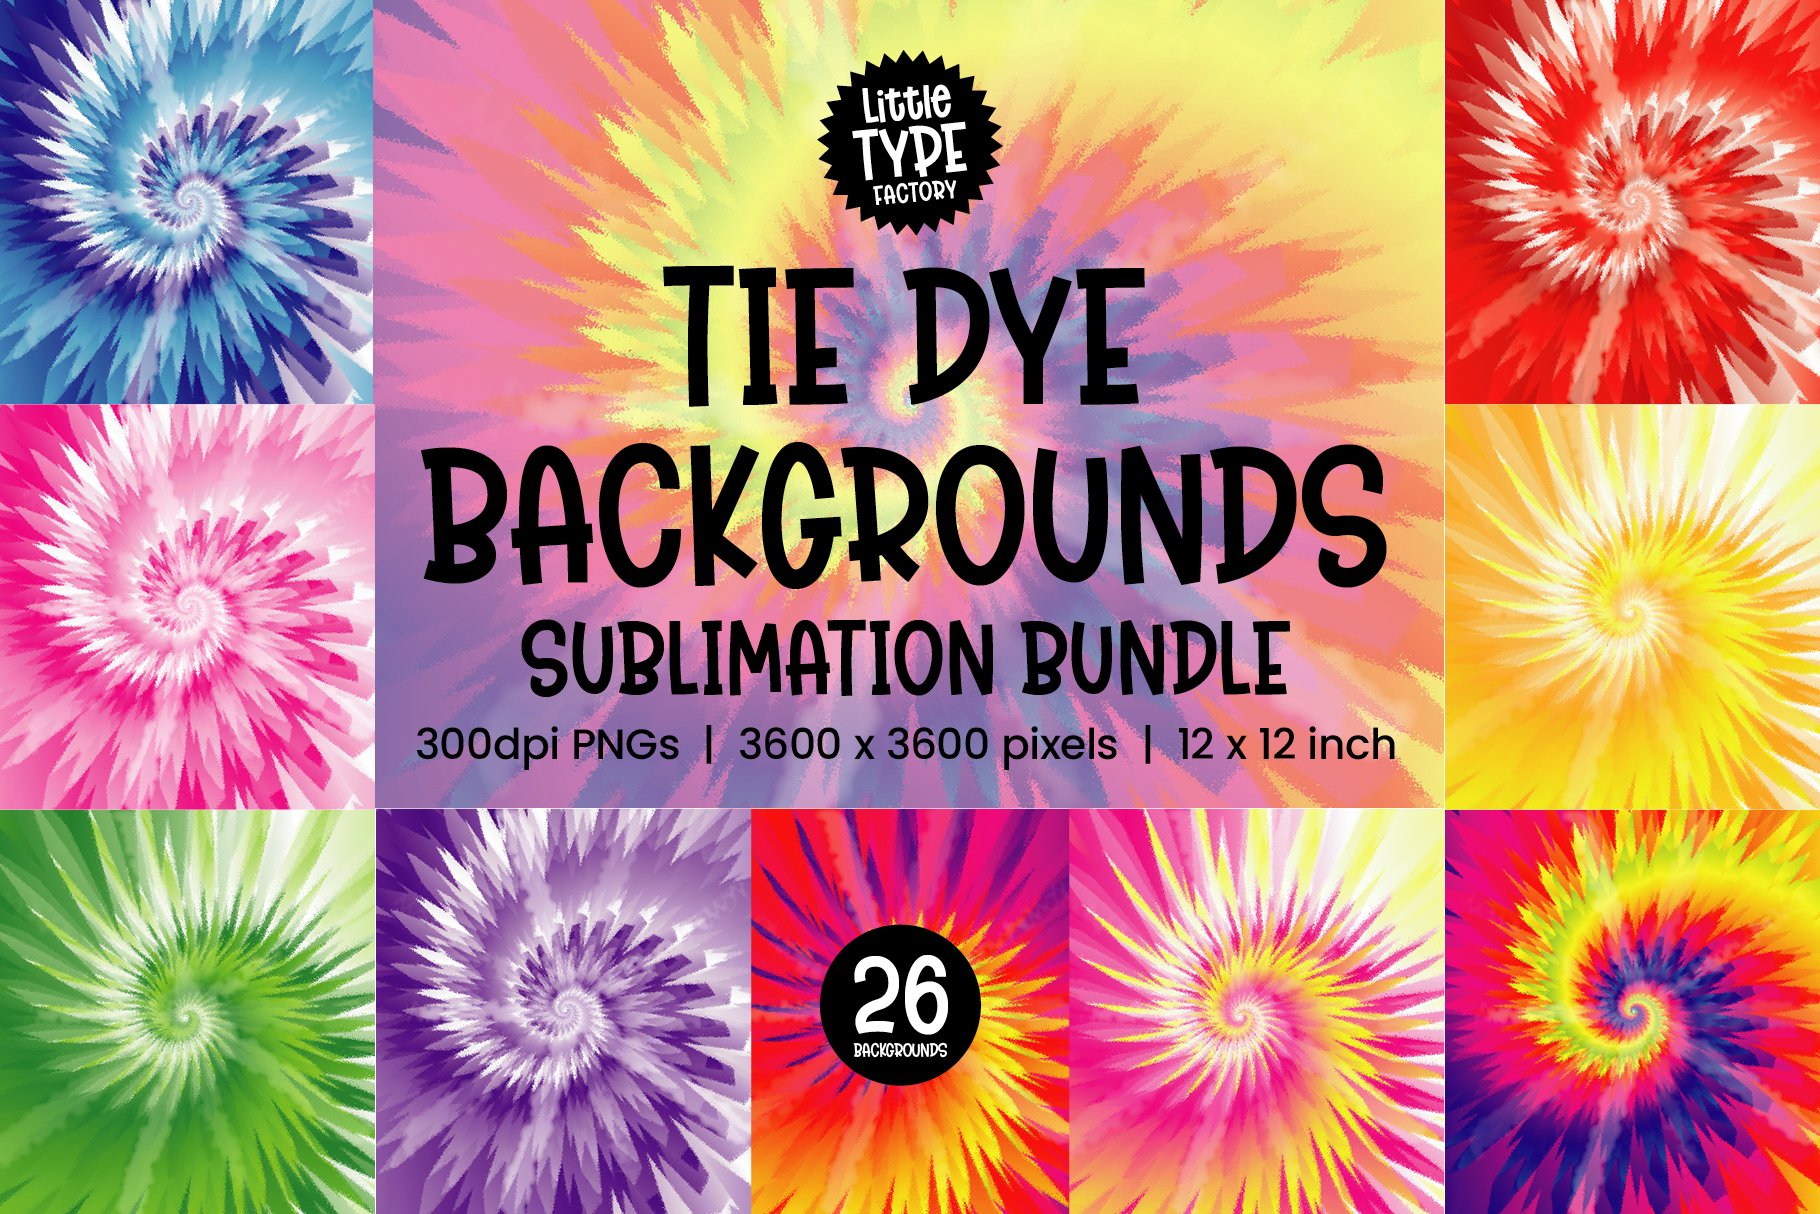 TIE DYE BACKGROUNDS cover image.